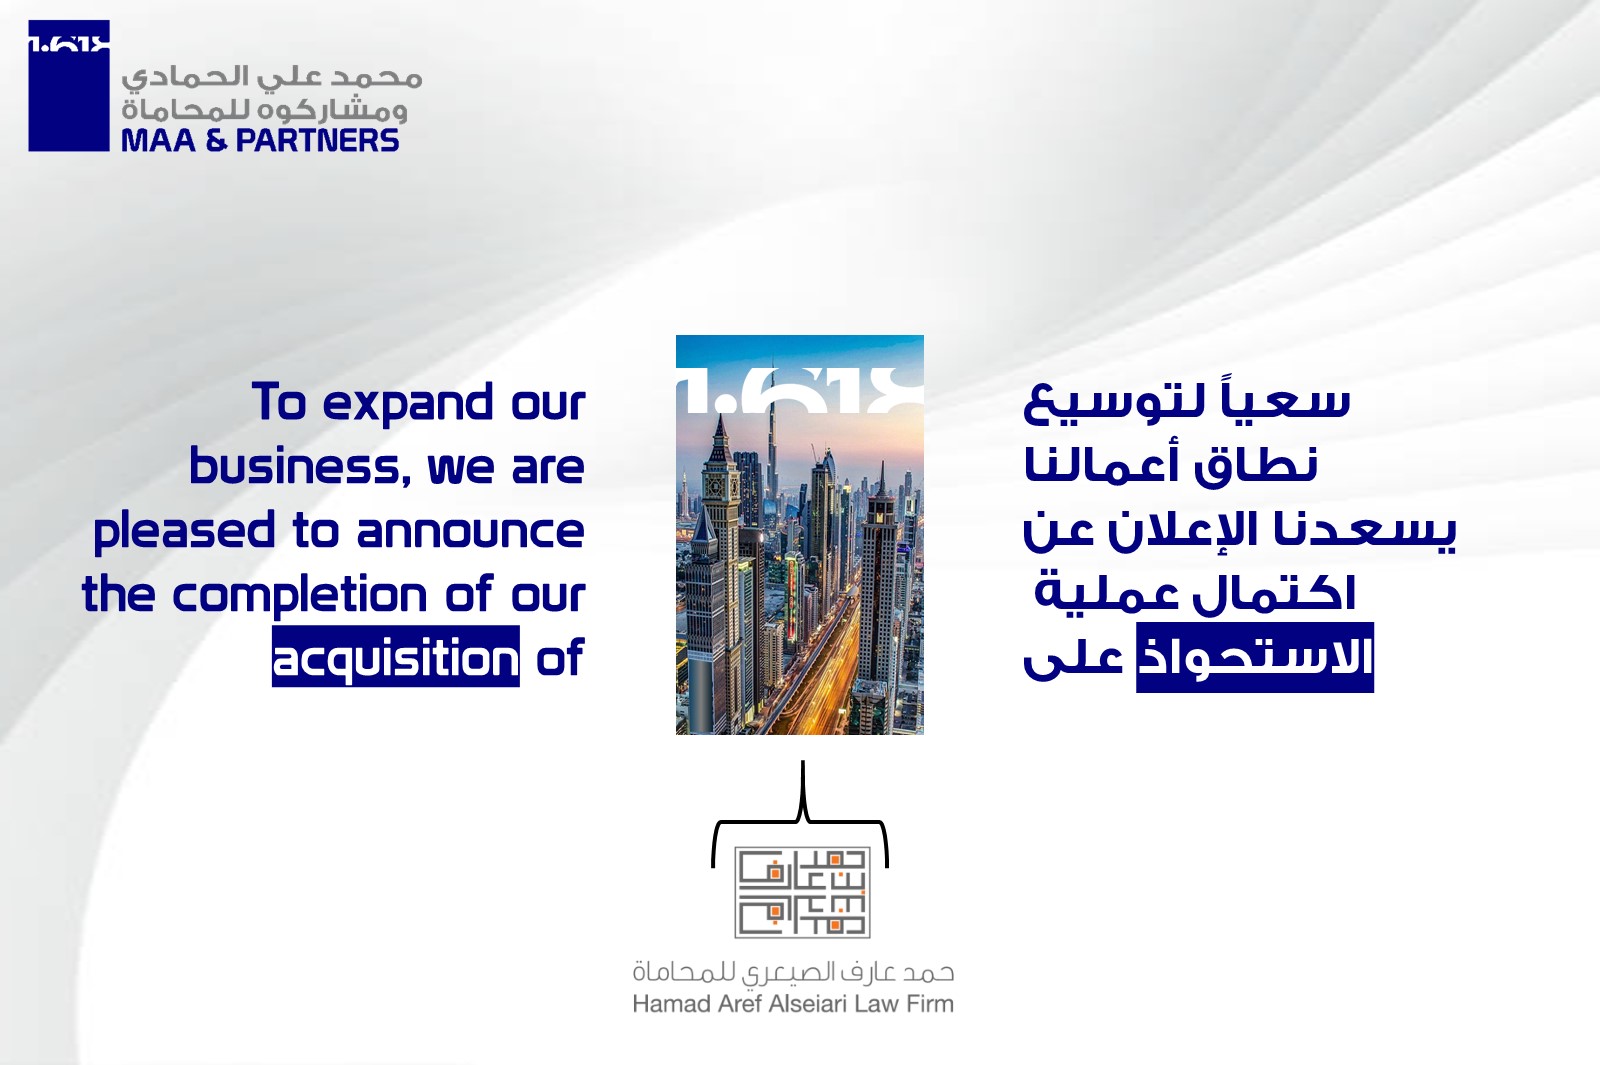 MAA & PARTERS acquires Hamad Aref Alseiari Law Firm